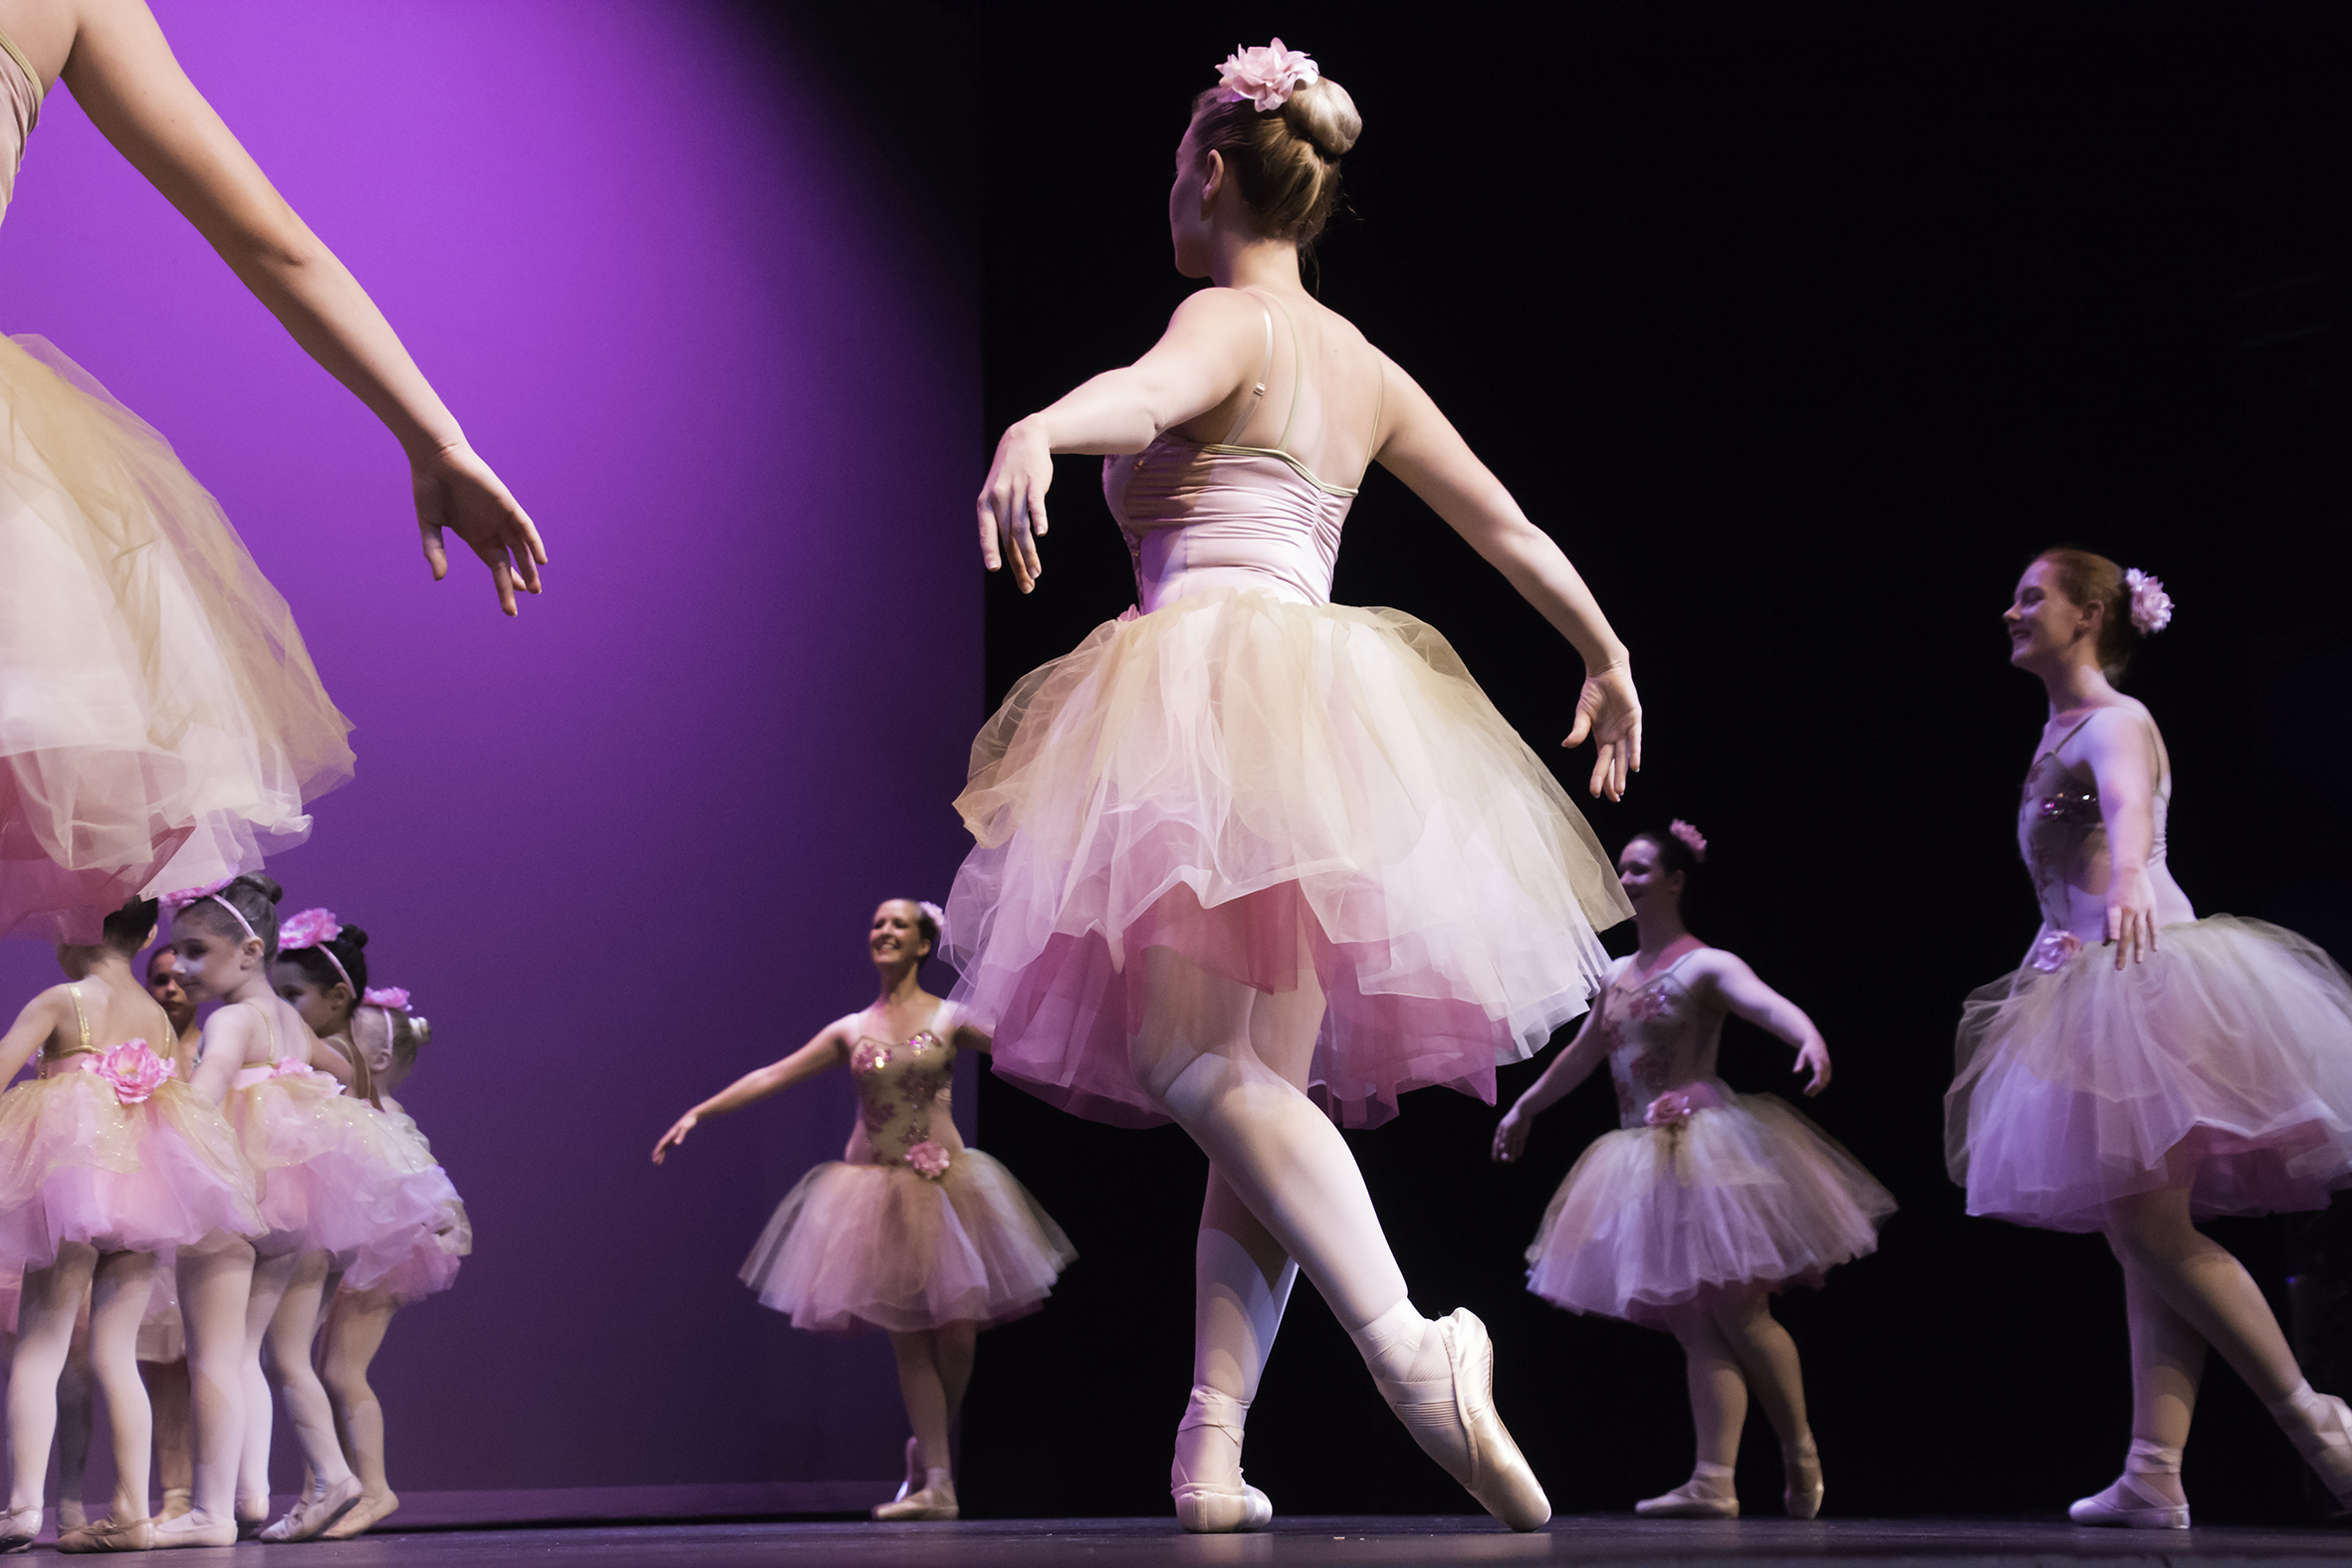 Senior and Junior classical ballet performance – Waltz of the Flowers